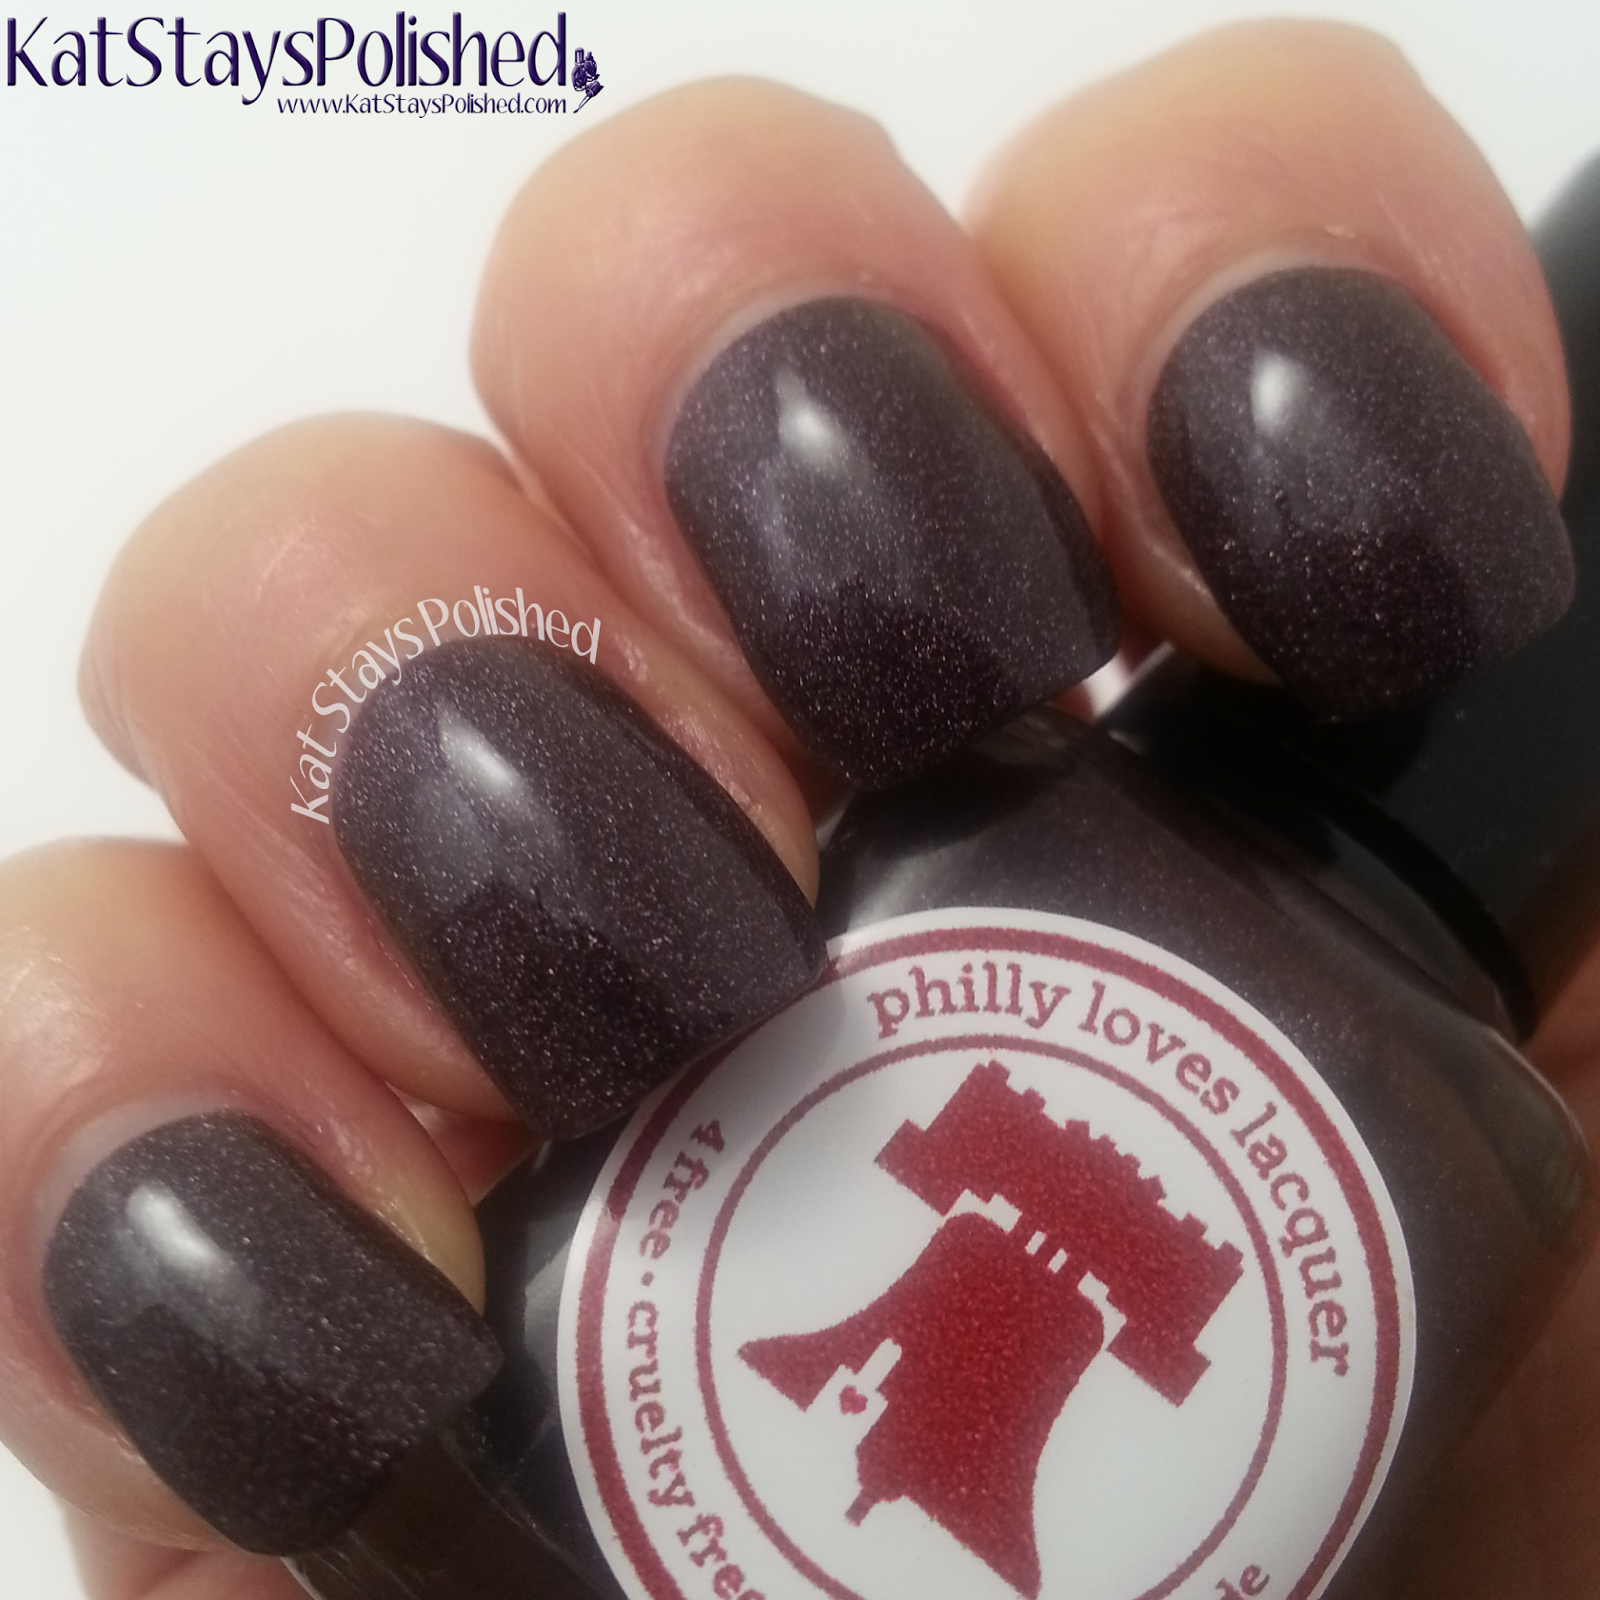 Philly Loves Lacquer: Shopping Madness Trio - 2AM Coffee Run | Kat Stays Polished